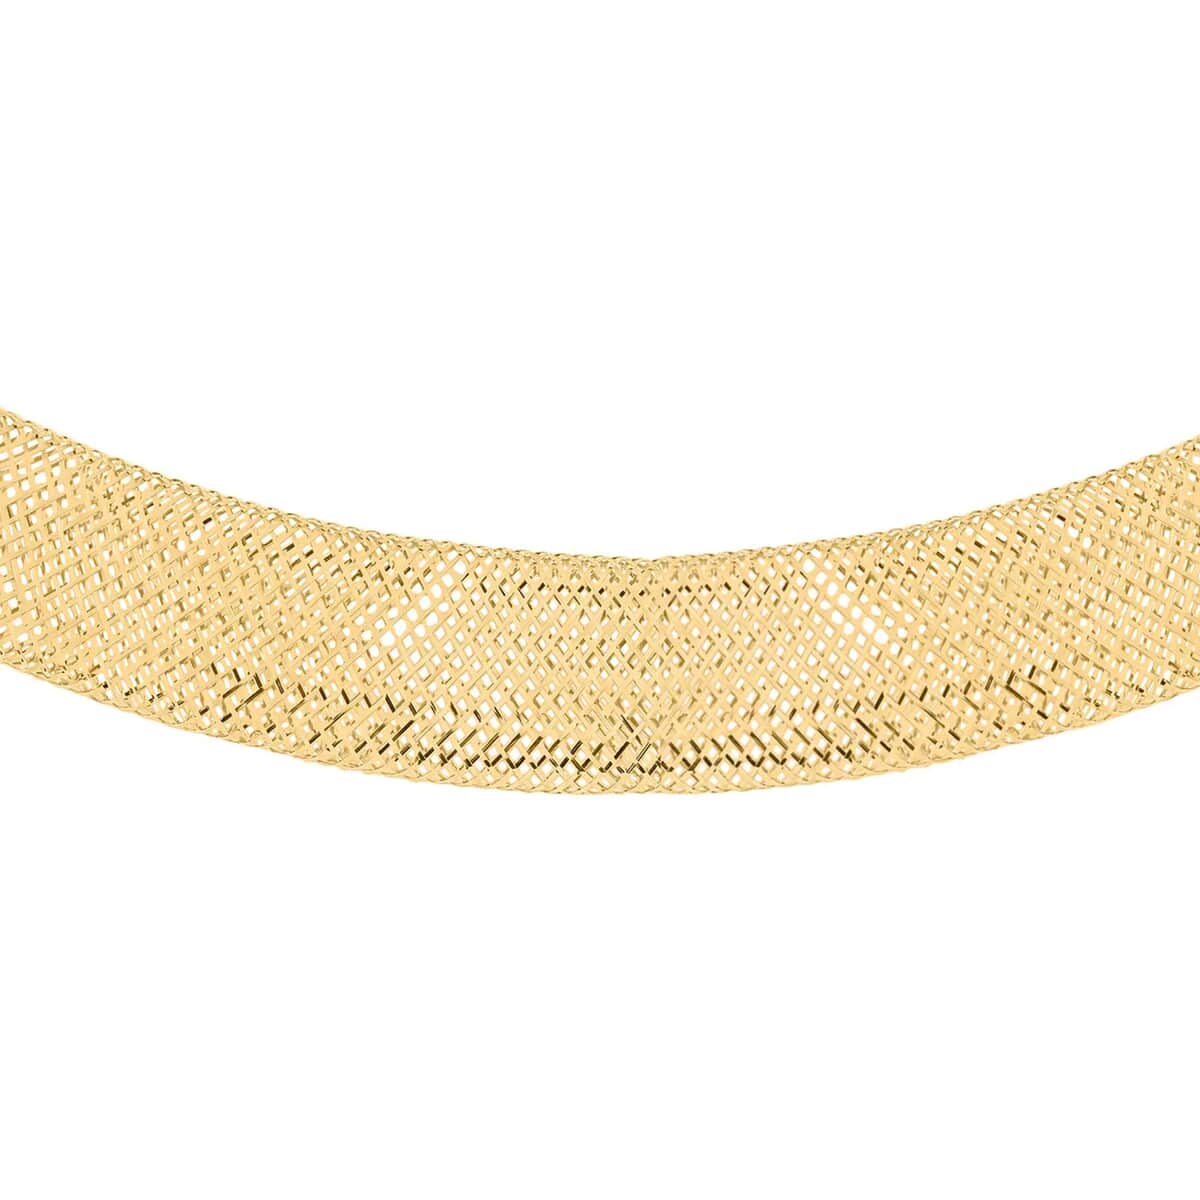 Italian Mesh Necklace 10K Yellow Gold, Gold Necklace, Jewelry Gifts For Her (18-20 Inches) image number 4